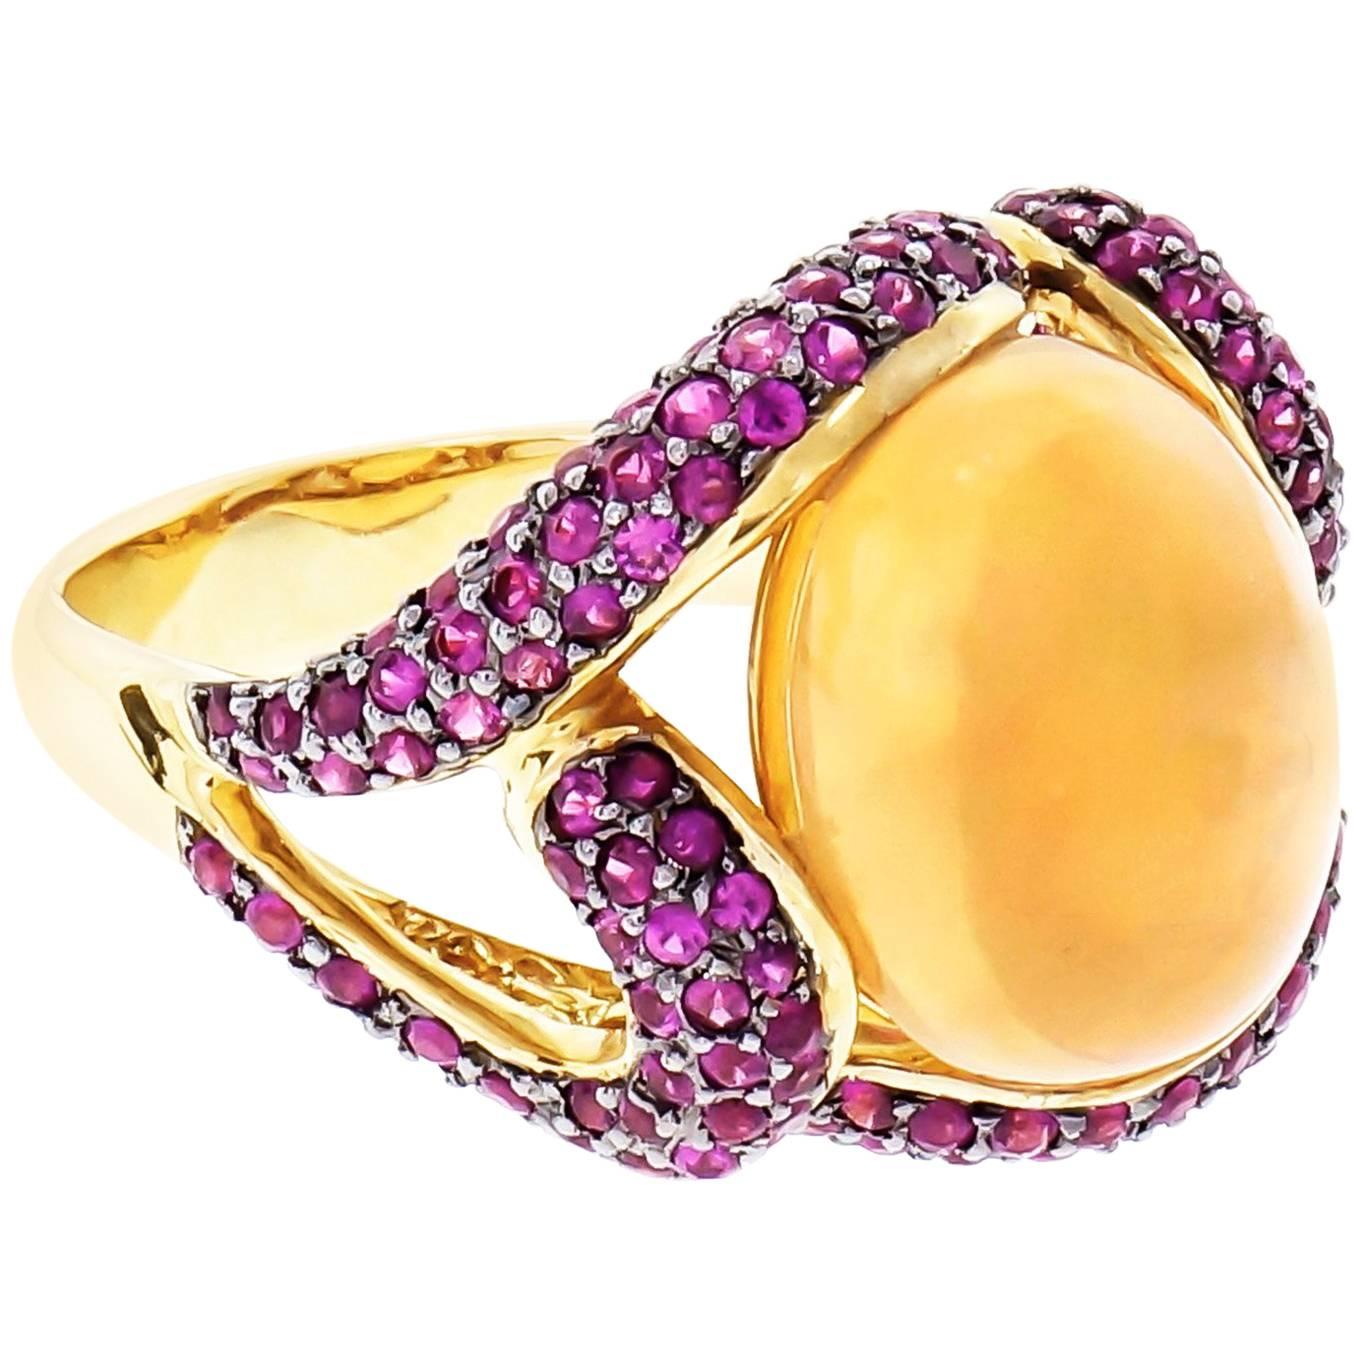 5.00 Carat Oval Crystal Opal Ruby Swirl Gold Cocktail Ring